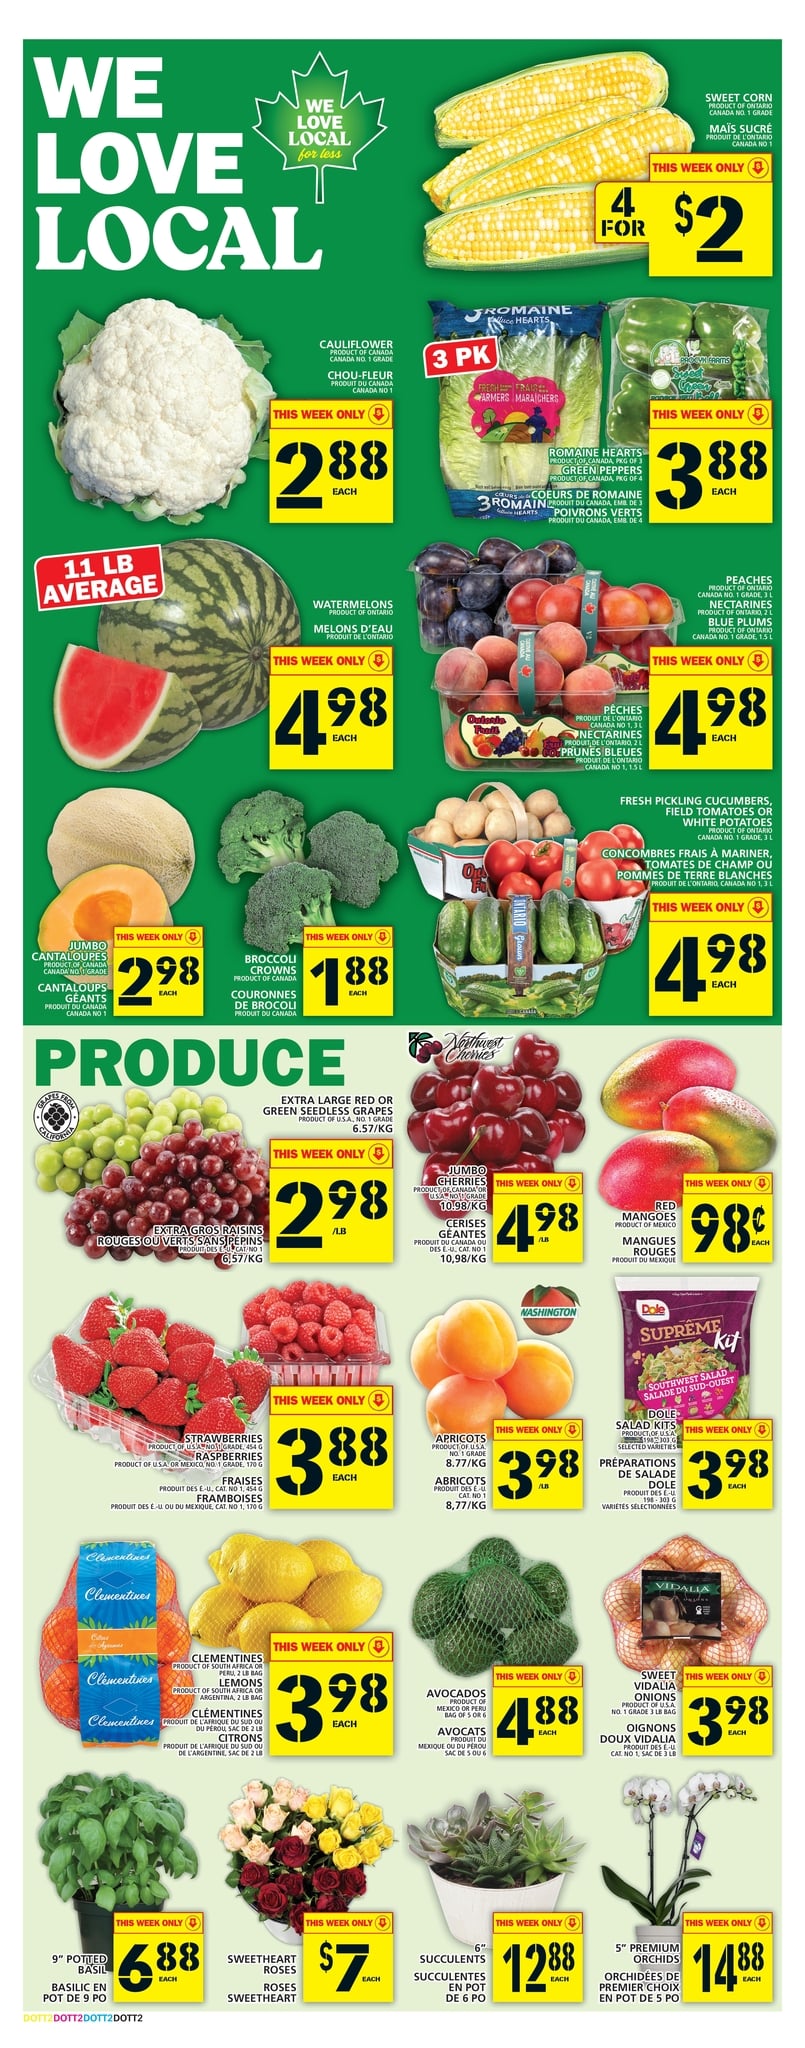 Food Basics - Weekly Flyer Specials - Page 4